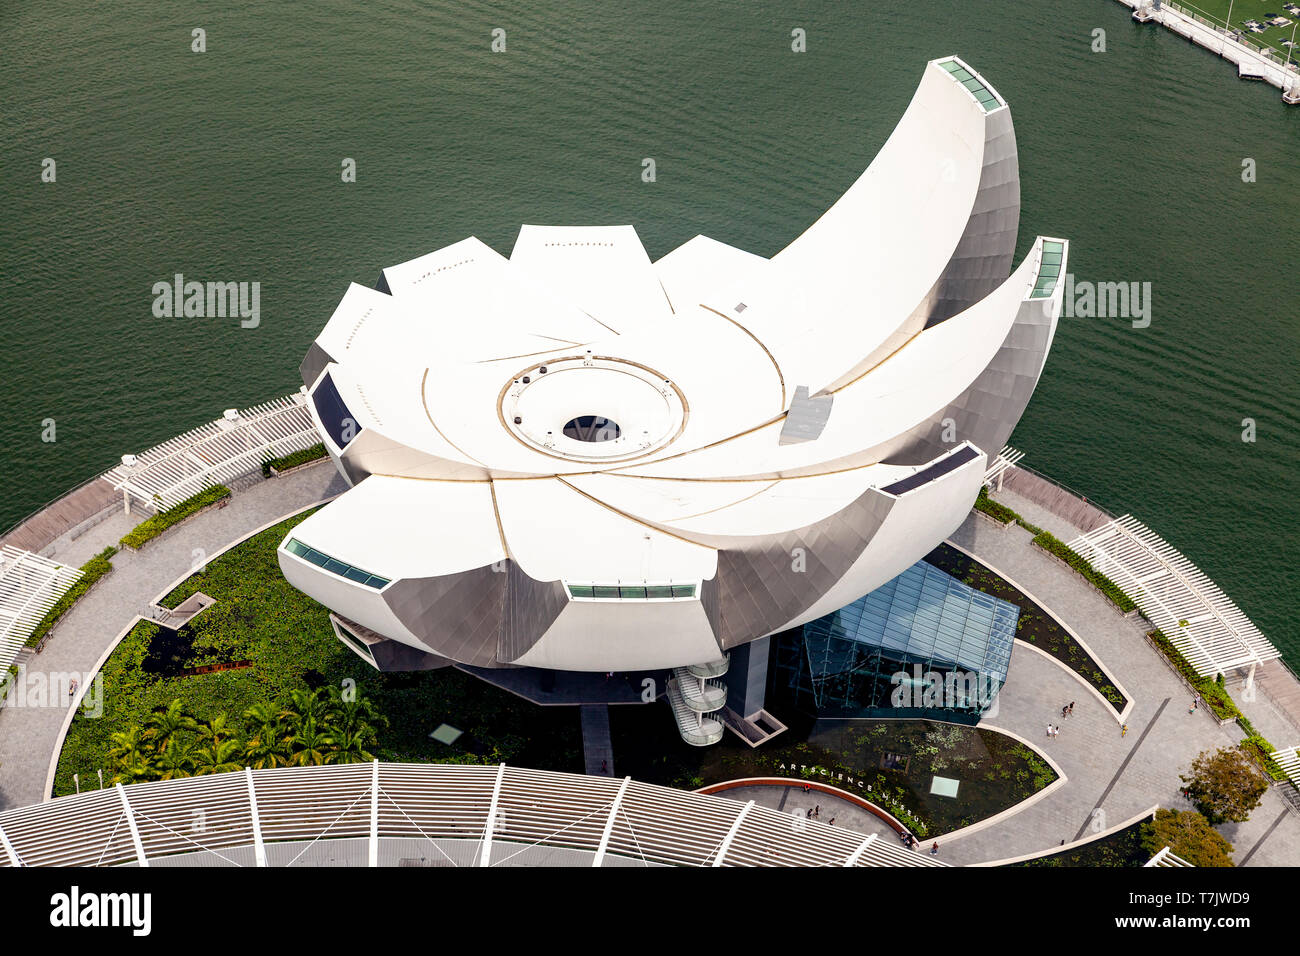 An Aerial View Of The ArtScience Museum, Singapore, South East Asia Stock Photo